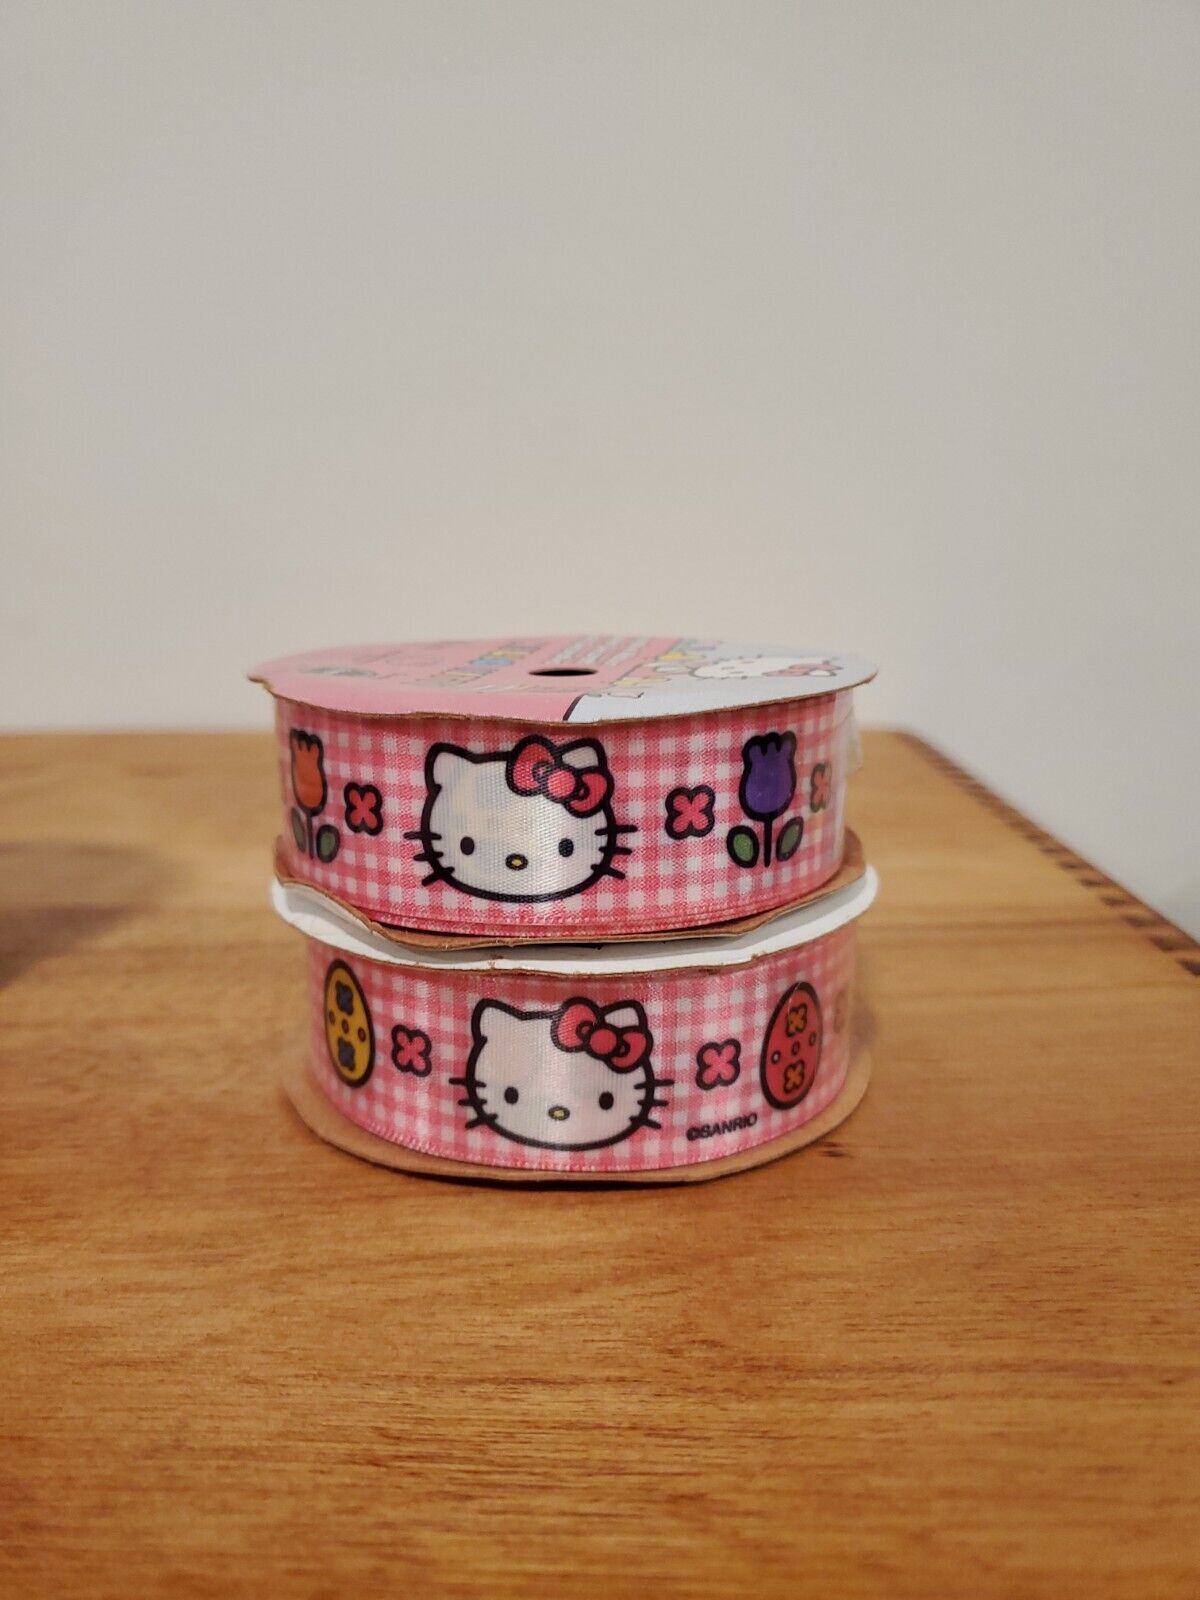 (2) Hello Kitty by Sanrio  2013 decorative ribbon hair bow Offray 7/8 in x 9 ft - $21.41